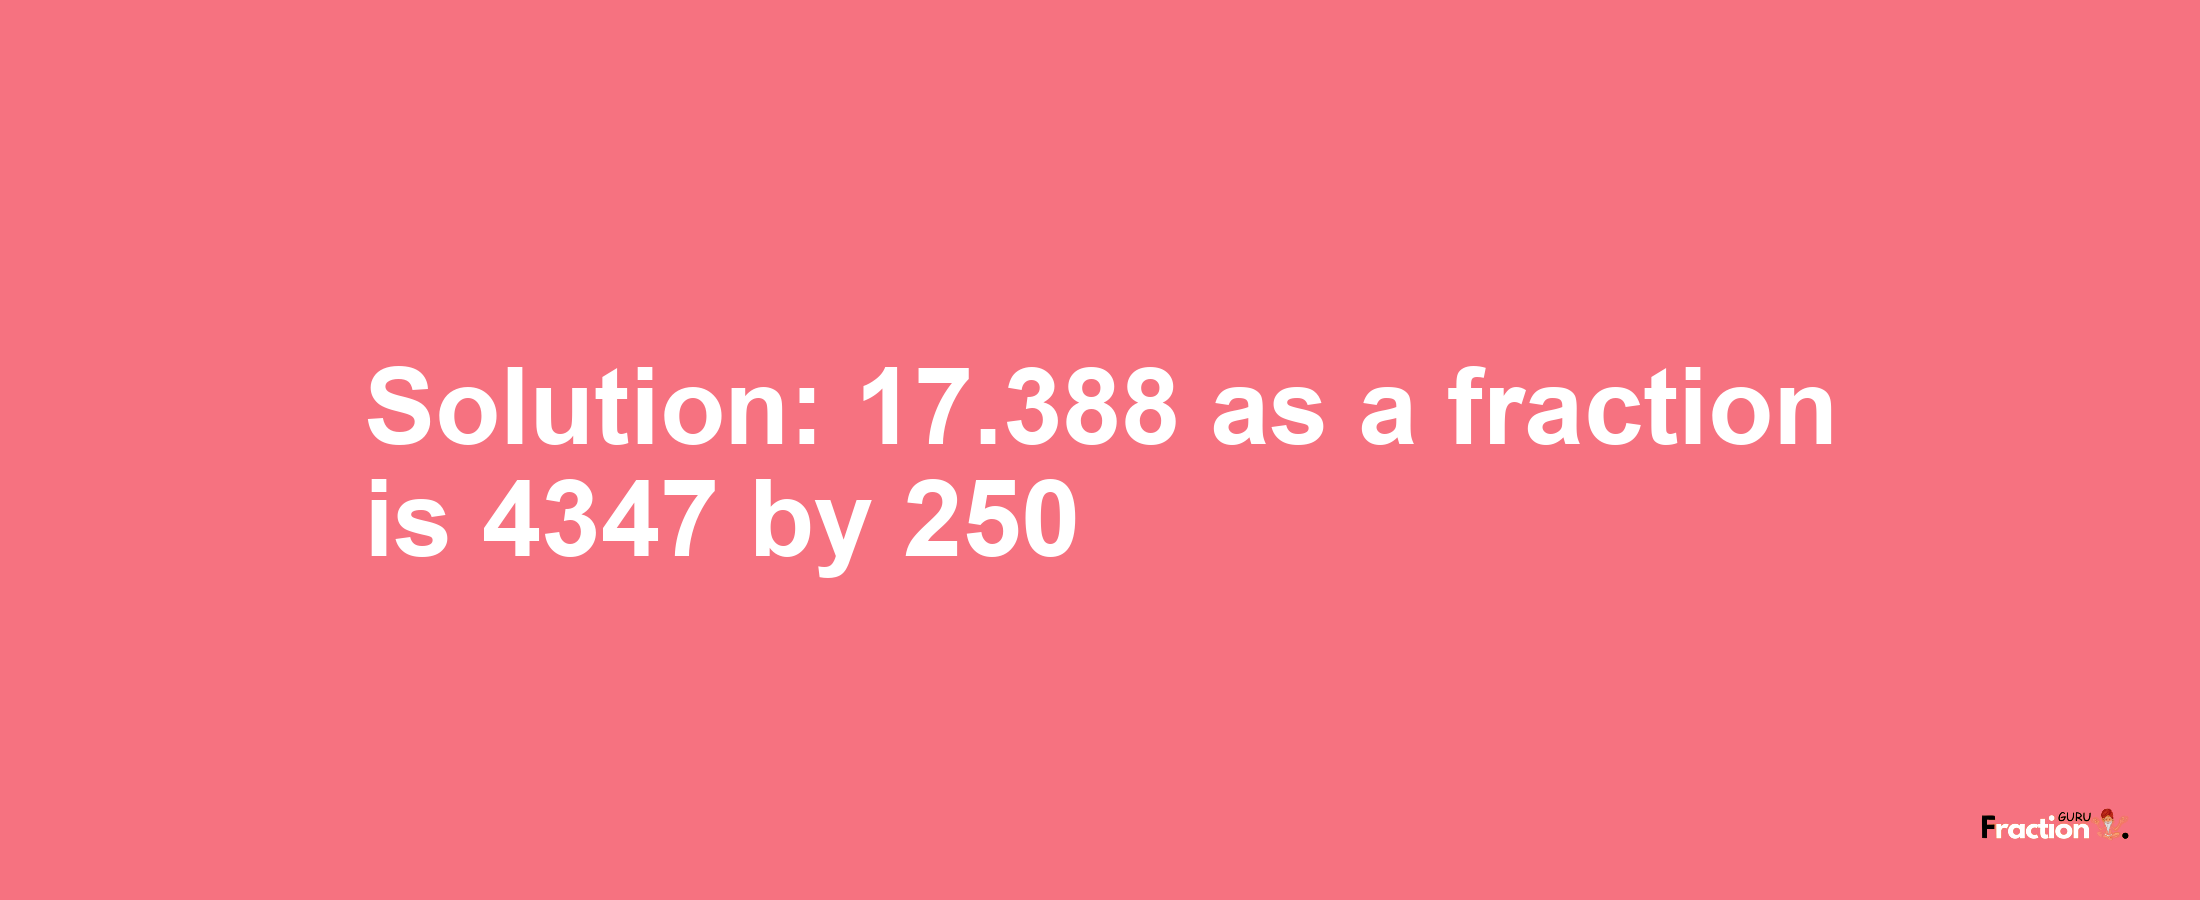 Solution:17.388 as a fraction is 4347/250